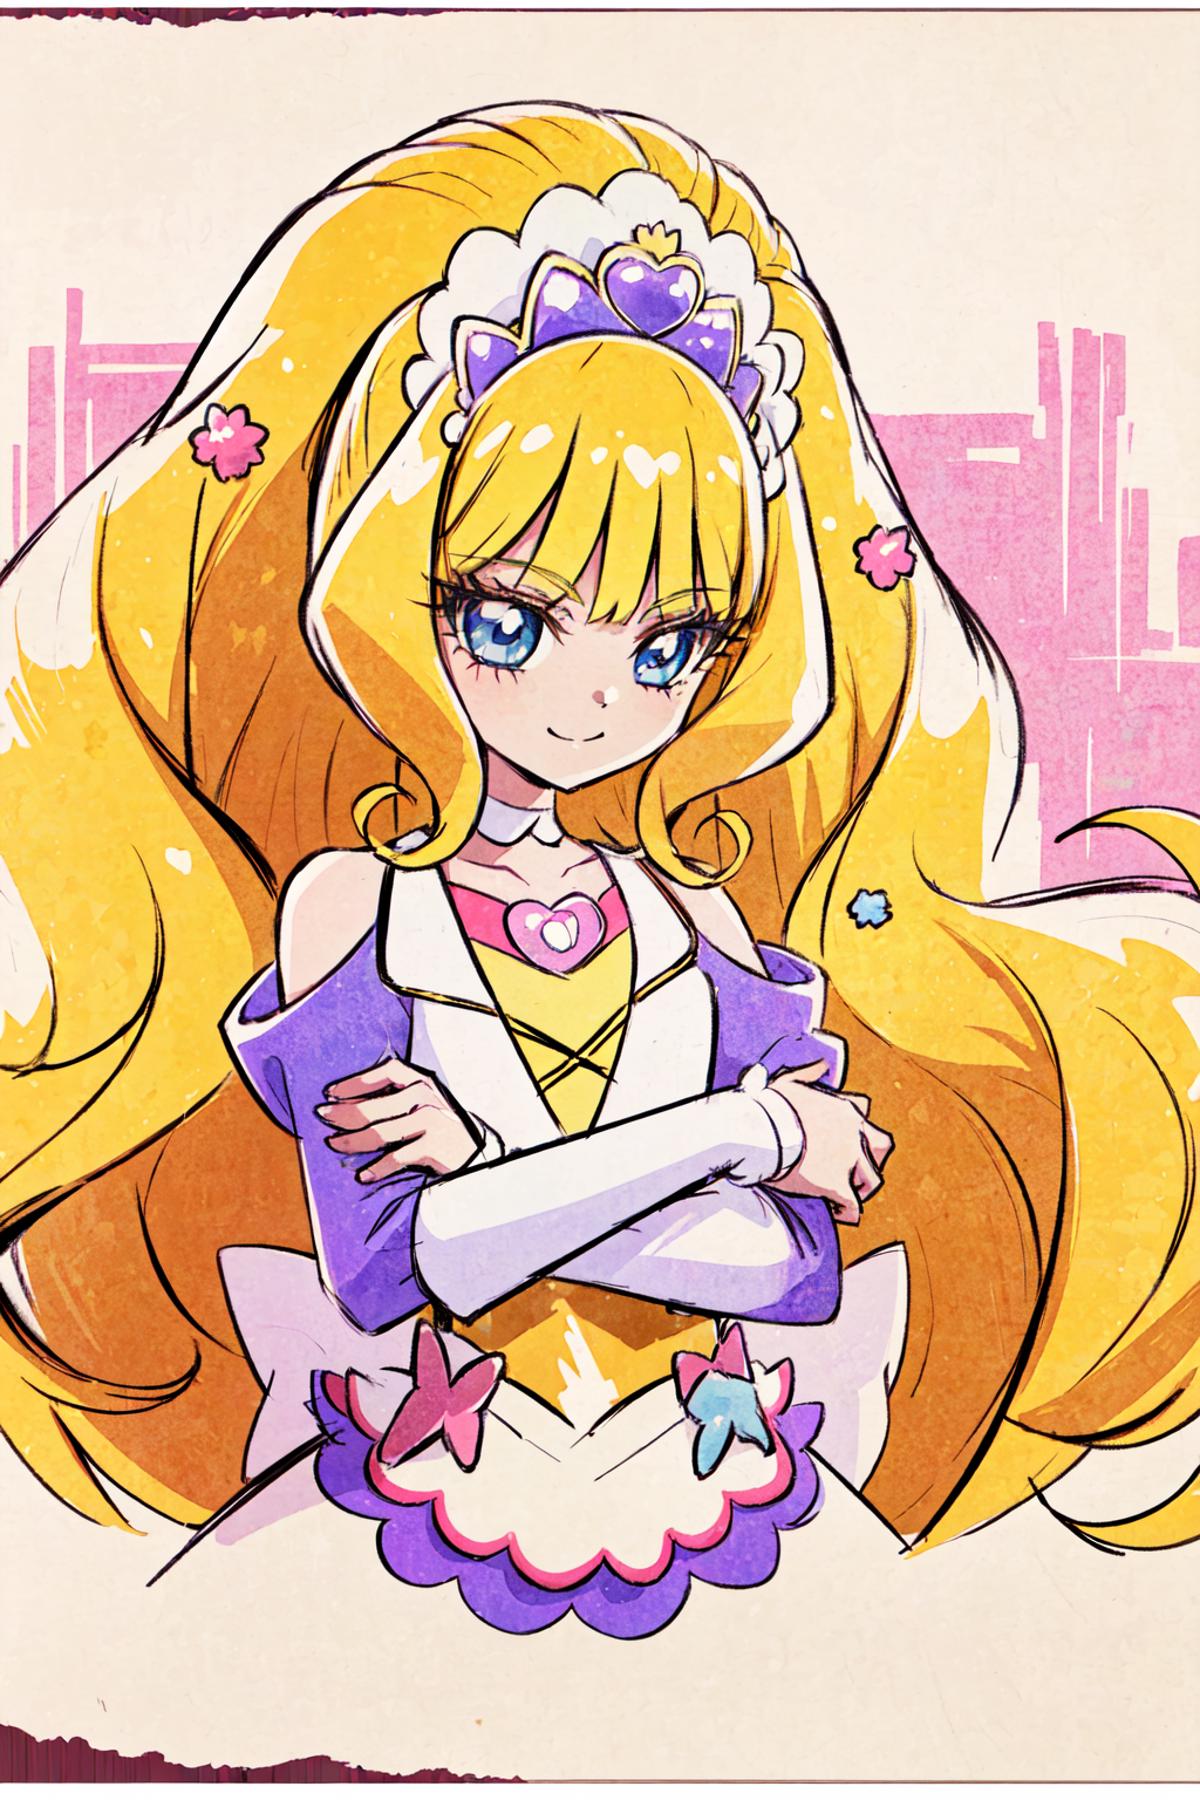 Cure Finale (Delicious Party♡Pretty Cure) デリシャスパーティ♡プリキュア キュアフィナーレ image by UnknownNo3